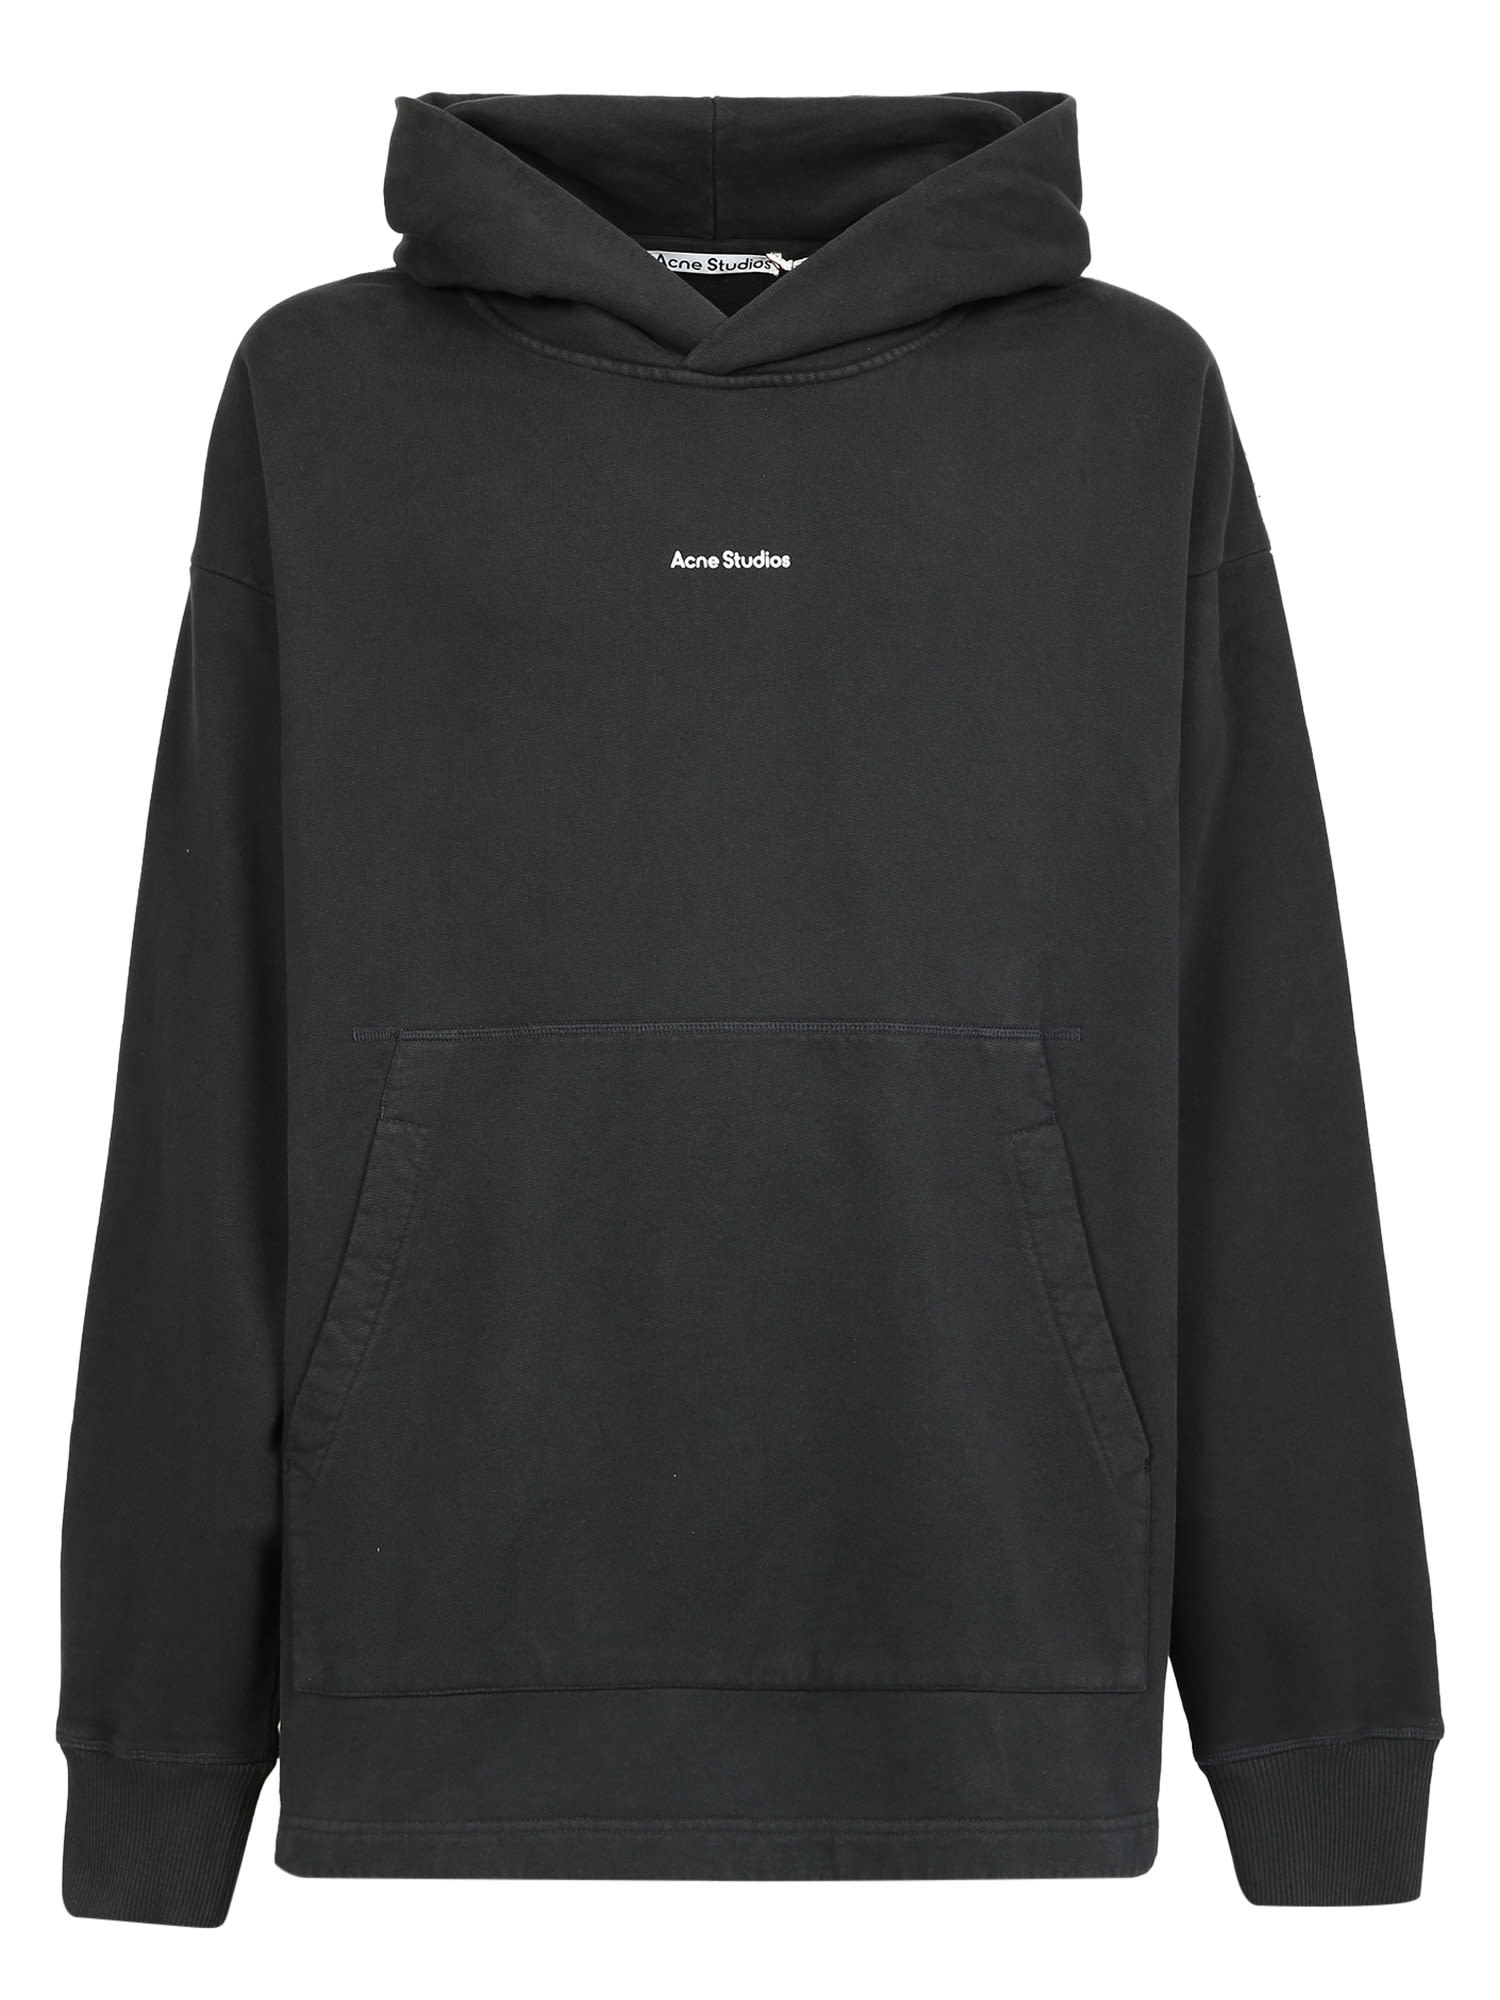 Acne Studios Combining Comfort And Style, Present This Hoodie With An ...